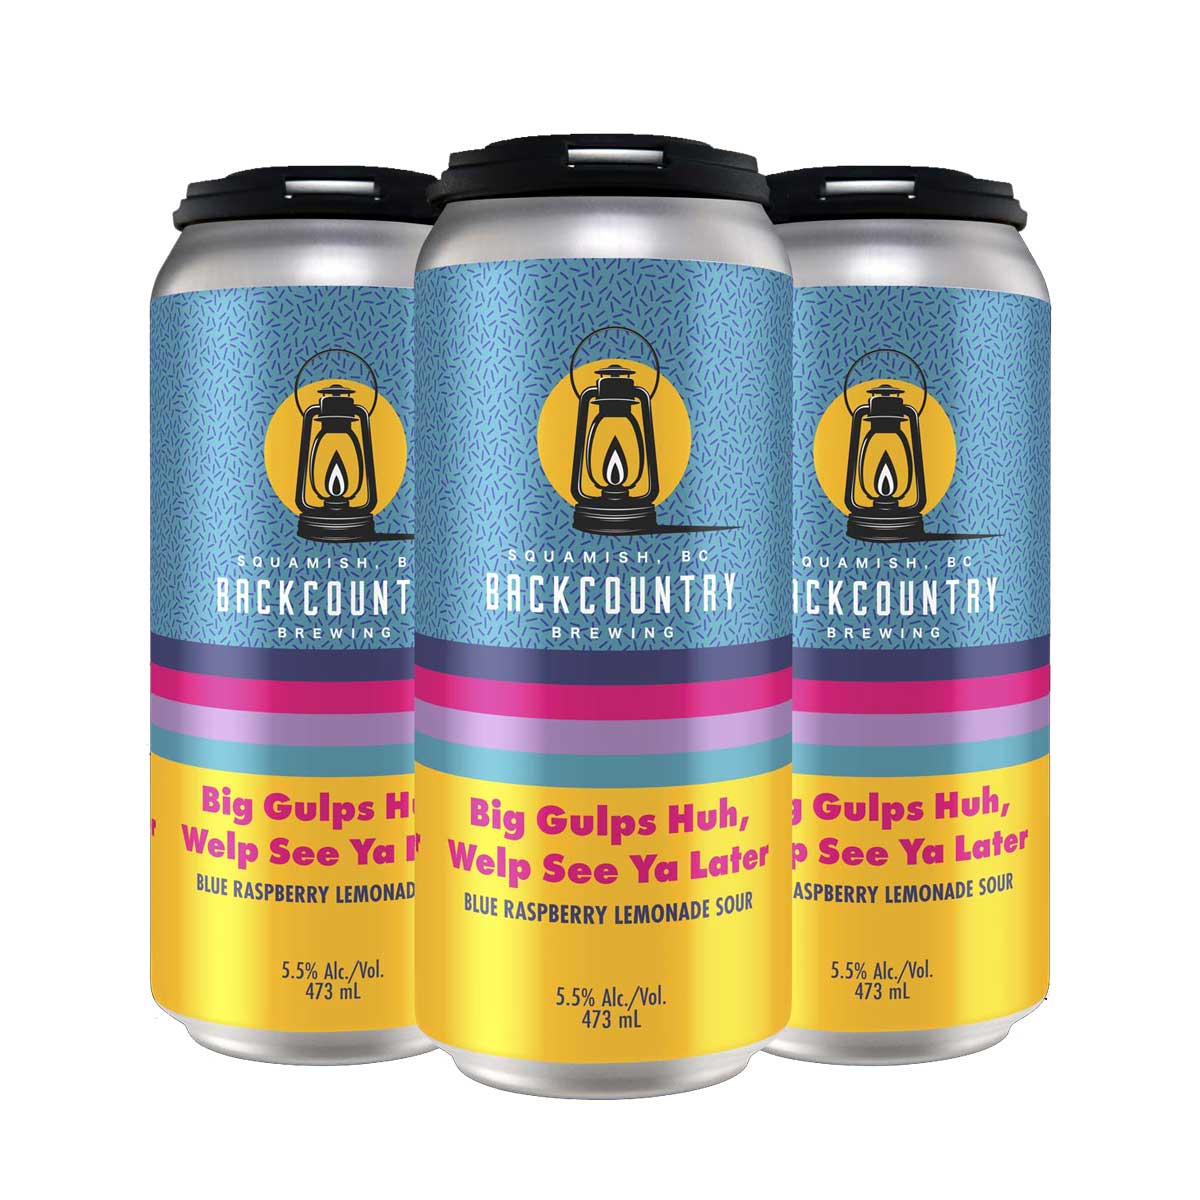 TAG Liquor Stores BC - Backcountry Brewing "Big gulp Huh, welp see ya later" Blue Raspberry Lemonade 4 Pack Cans